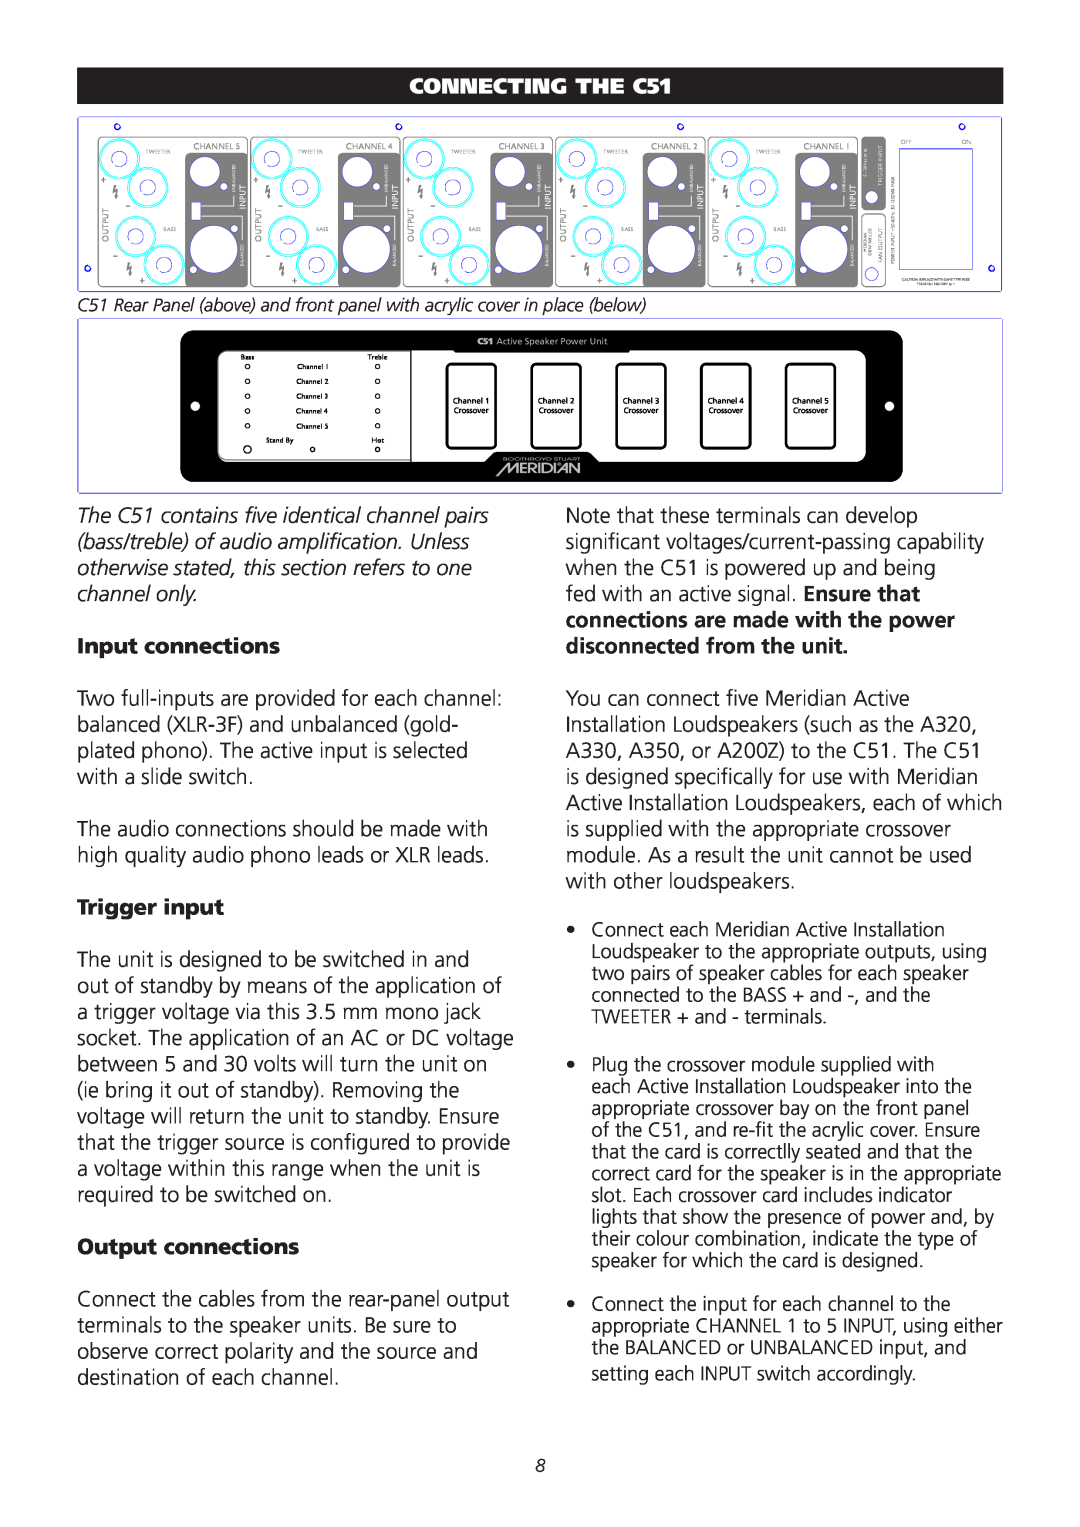 Meridian Audio operation manual Connecting the C51, Input connections, Trigger input, Output connections 